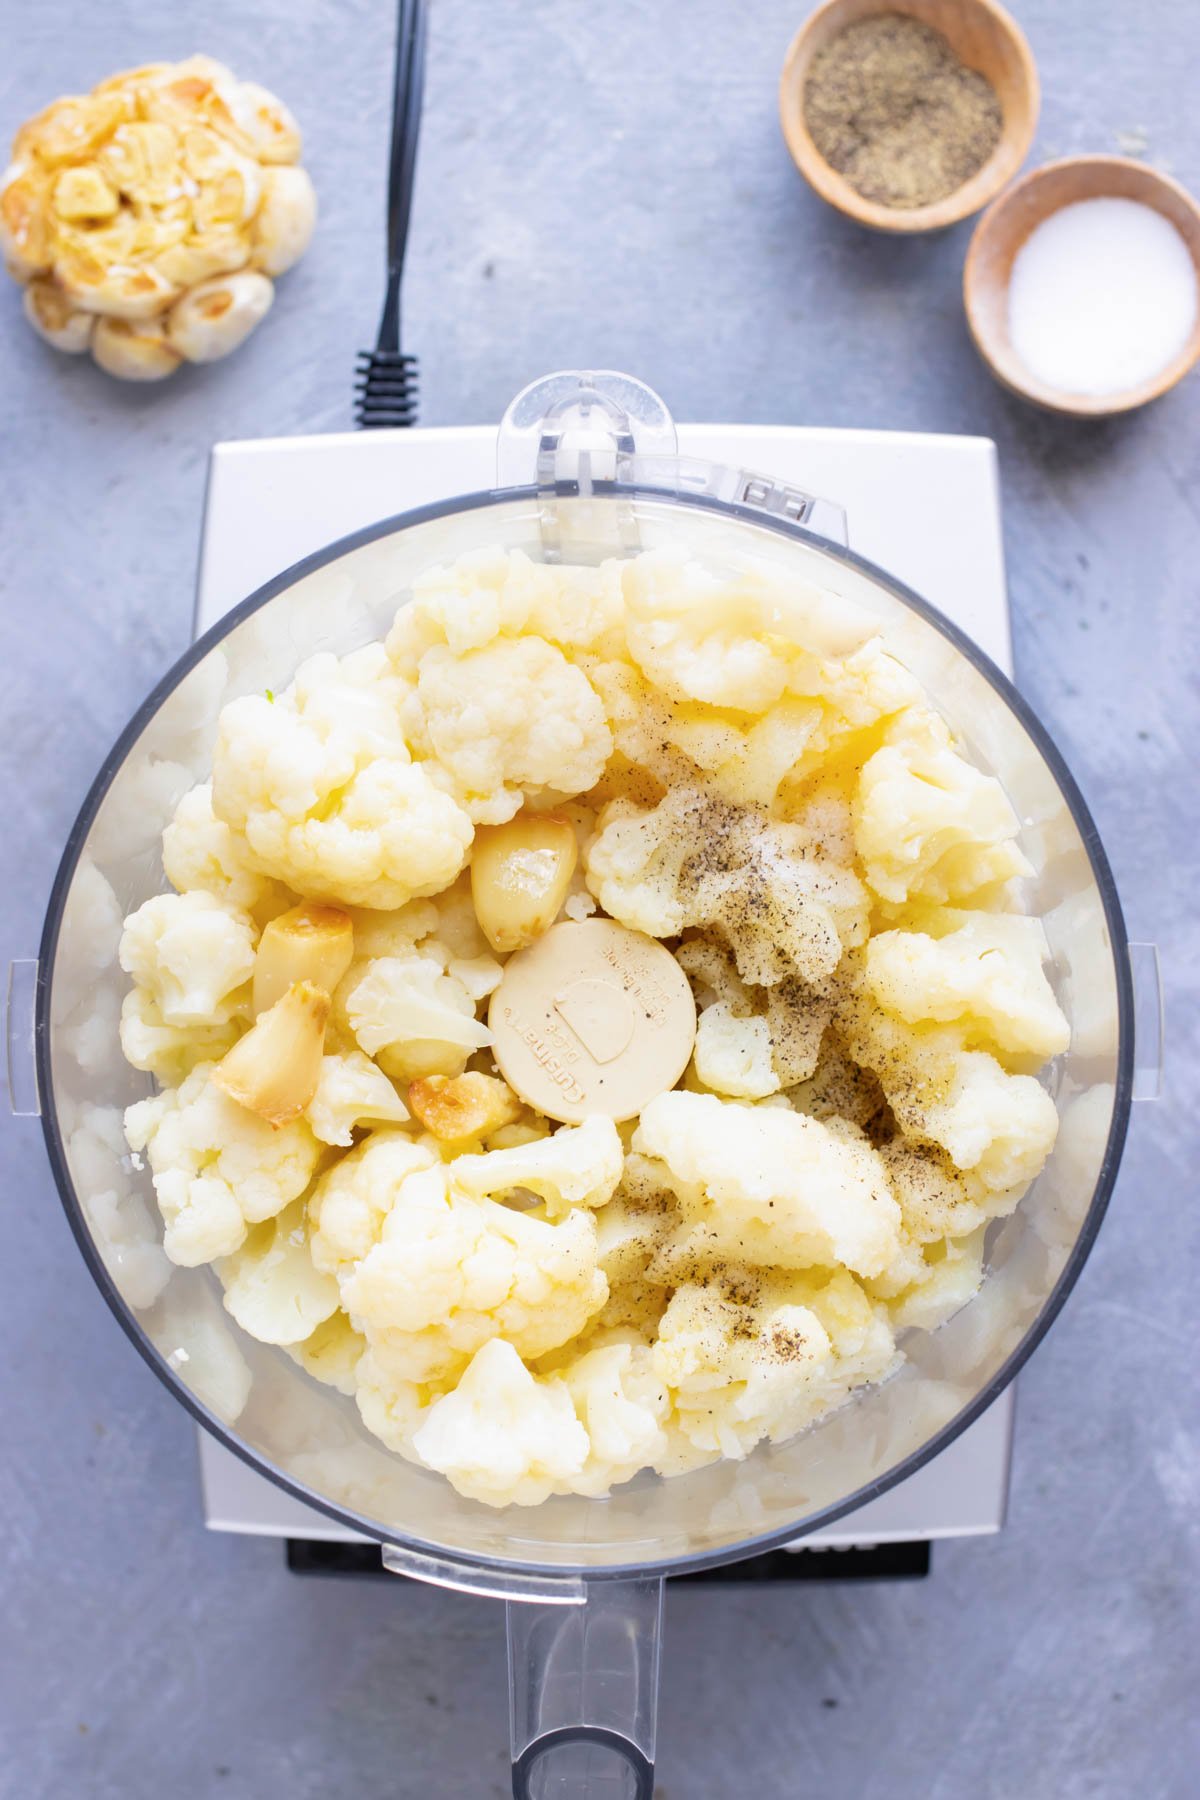 Cauliflower, garlic, and herbs are pureed in a food processor.